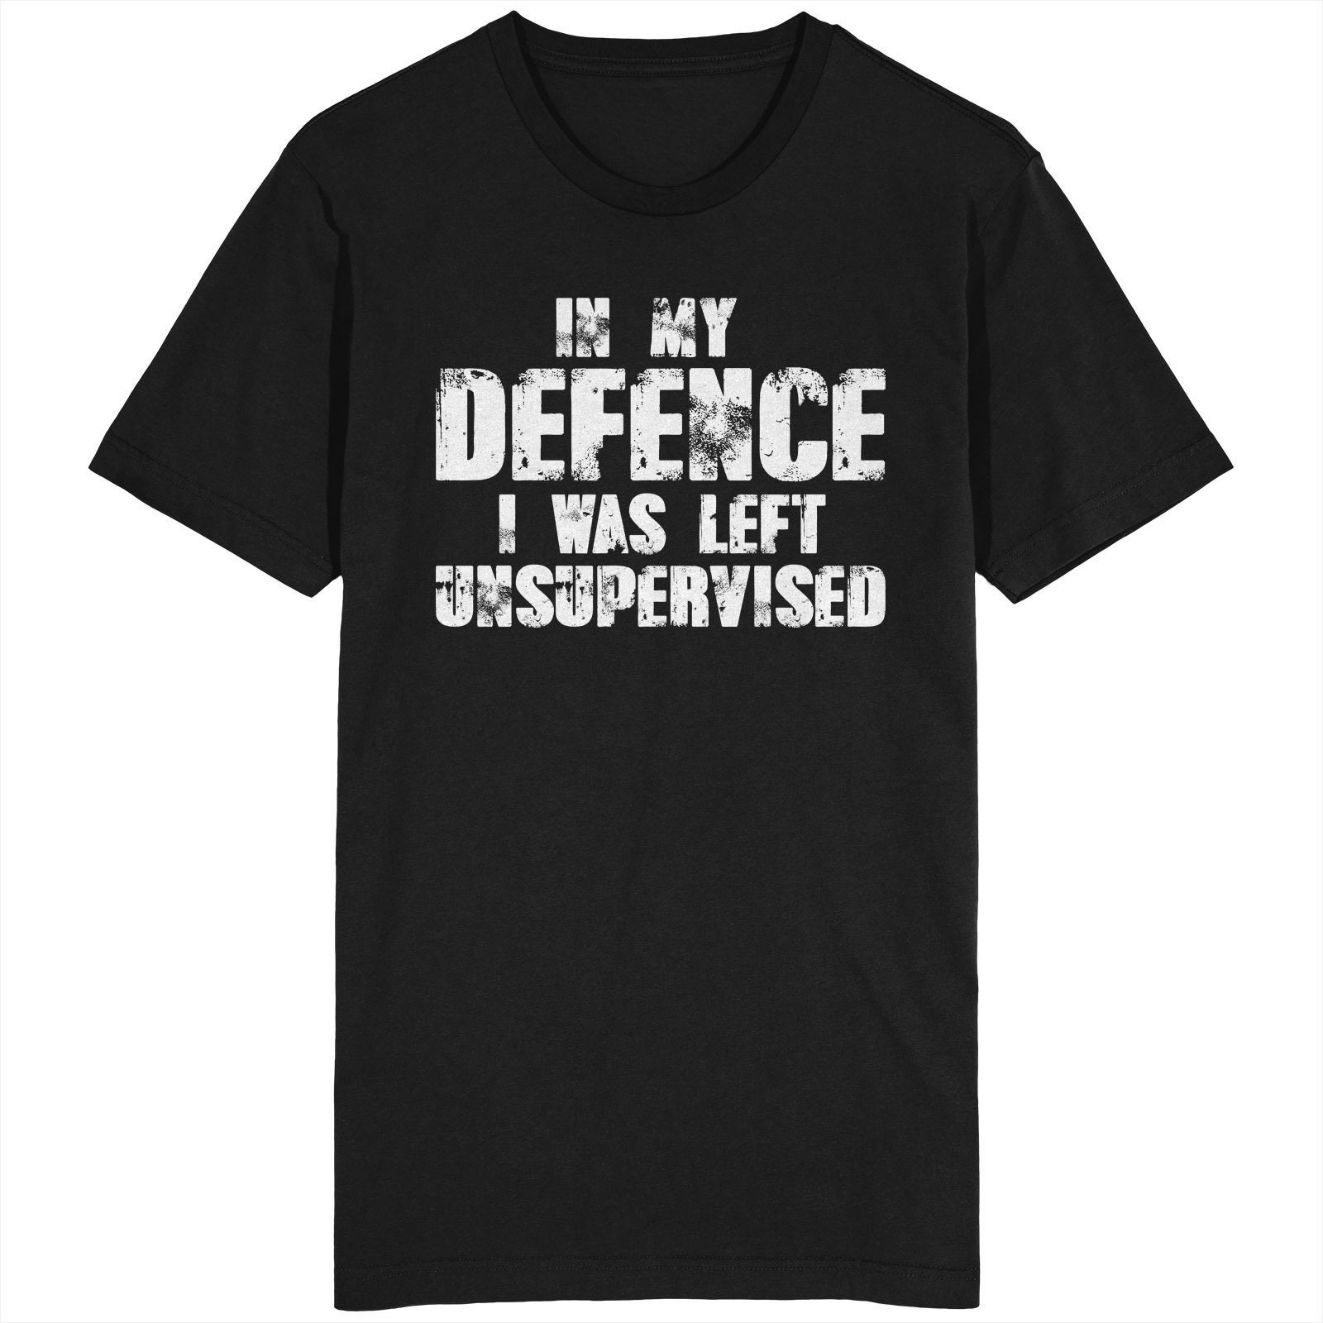 In My Defence I Was Left Unsupervised T-Shirt